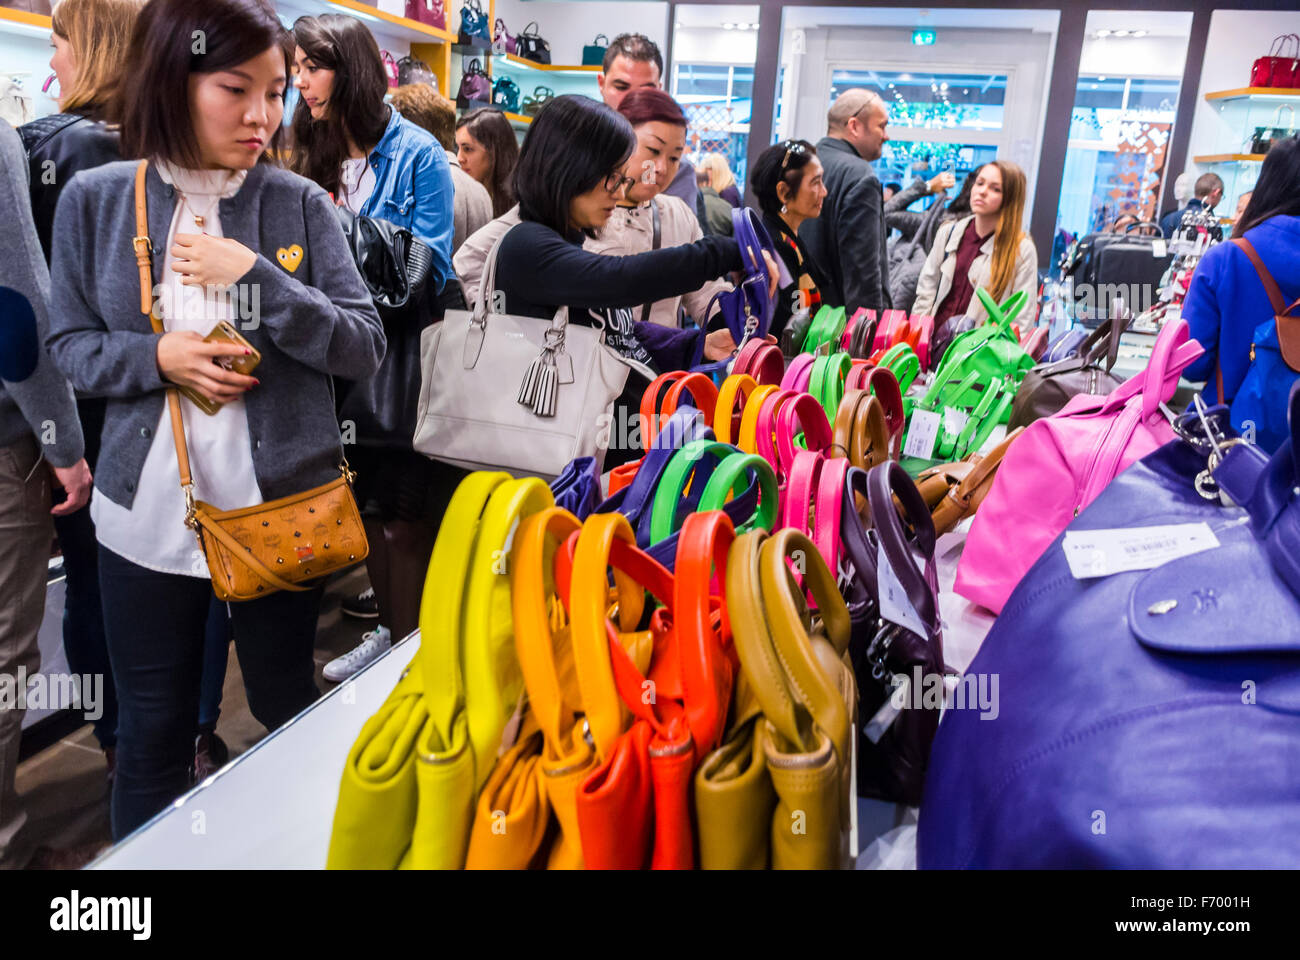 Paris, France, Crowd of Chinese Women Shopping in Outlet Mall, Centre Stock Photo: 90354477 - Alamy